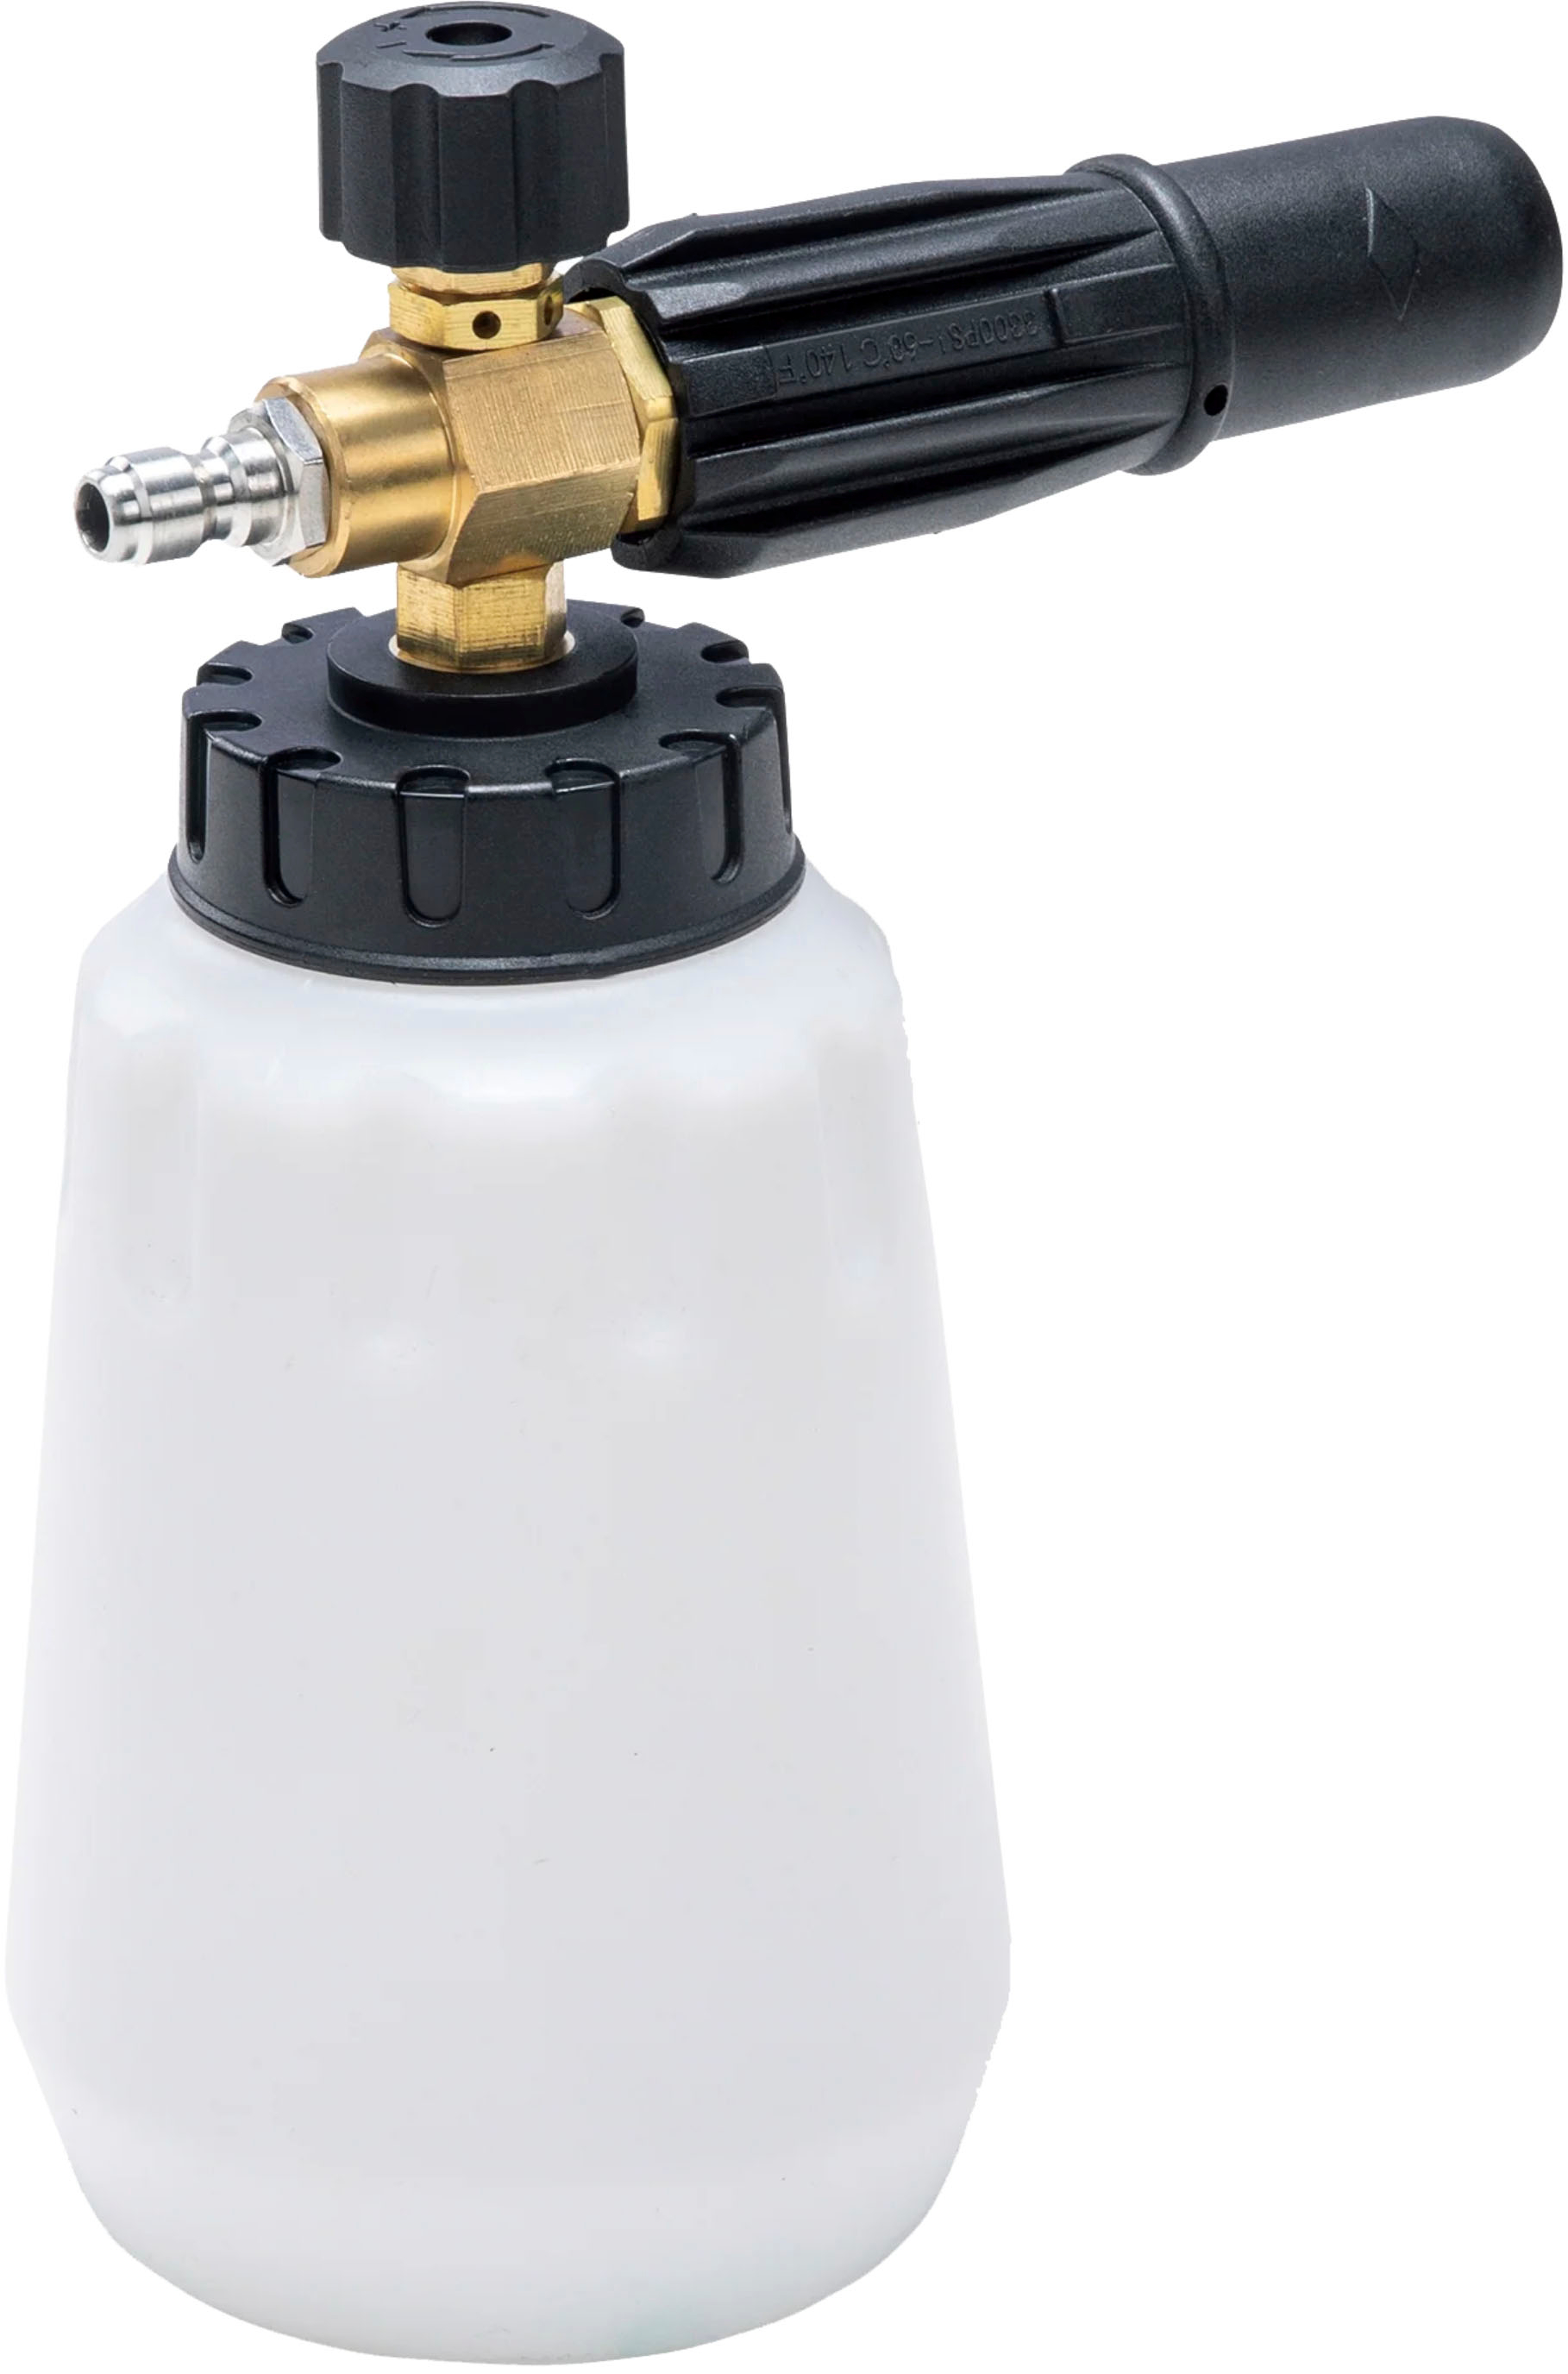 Pressure Washer Foam Cannon Snow Foam Lance & Extension Wand with 1/4” Quick Connector & 5 Spray Tips & Turbo Nozzle for Portland Husky Ryobi